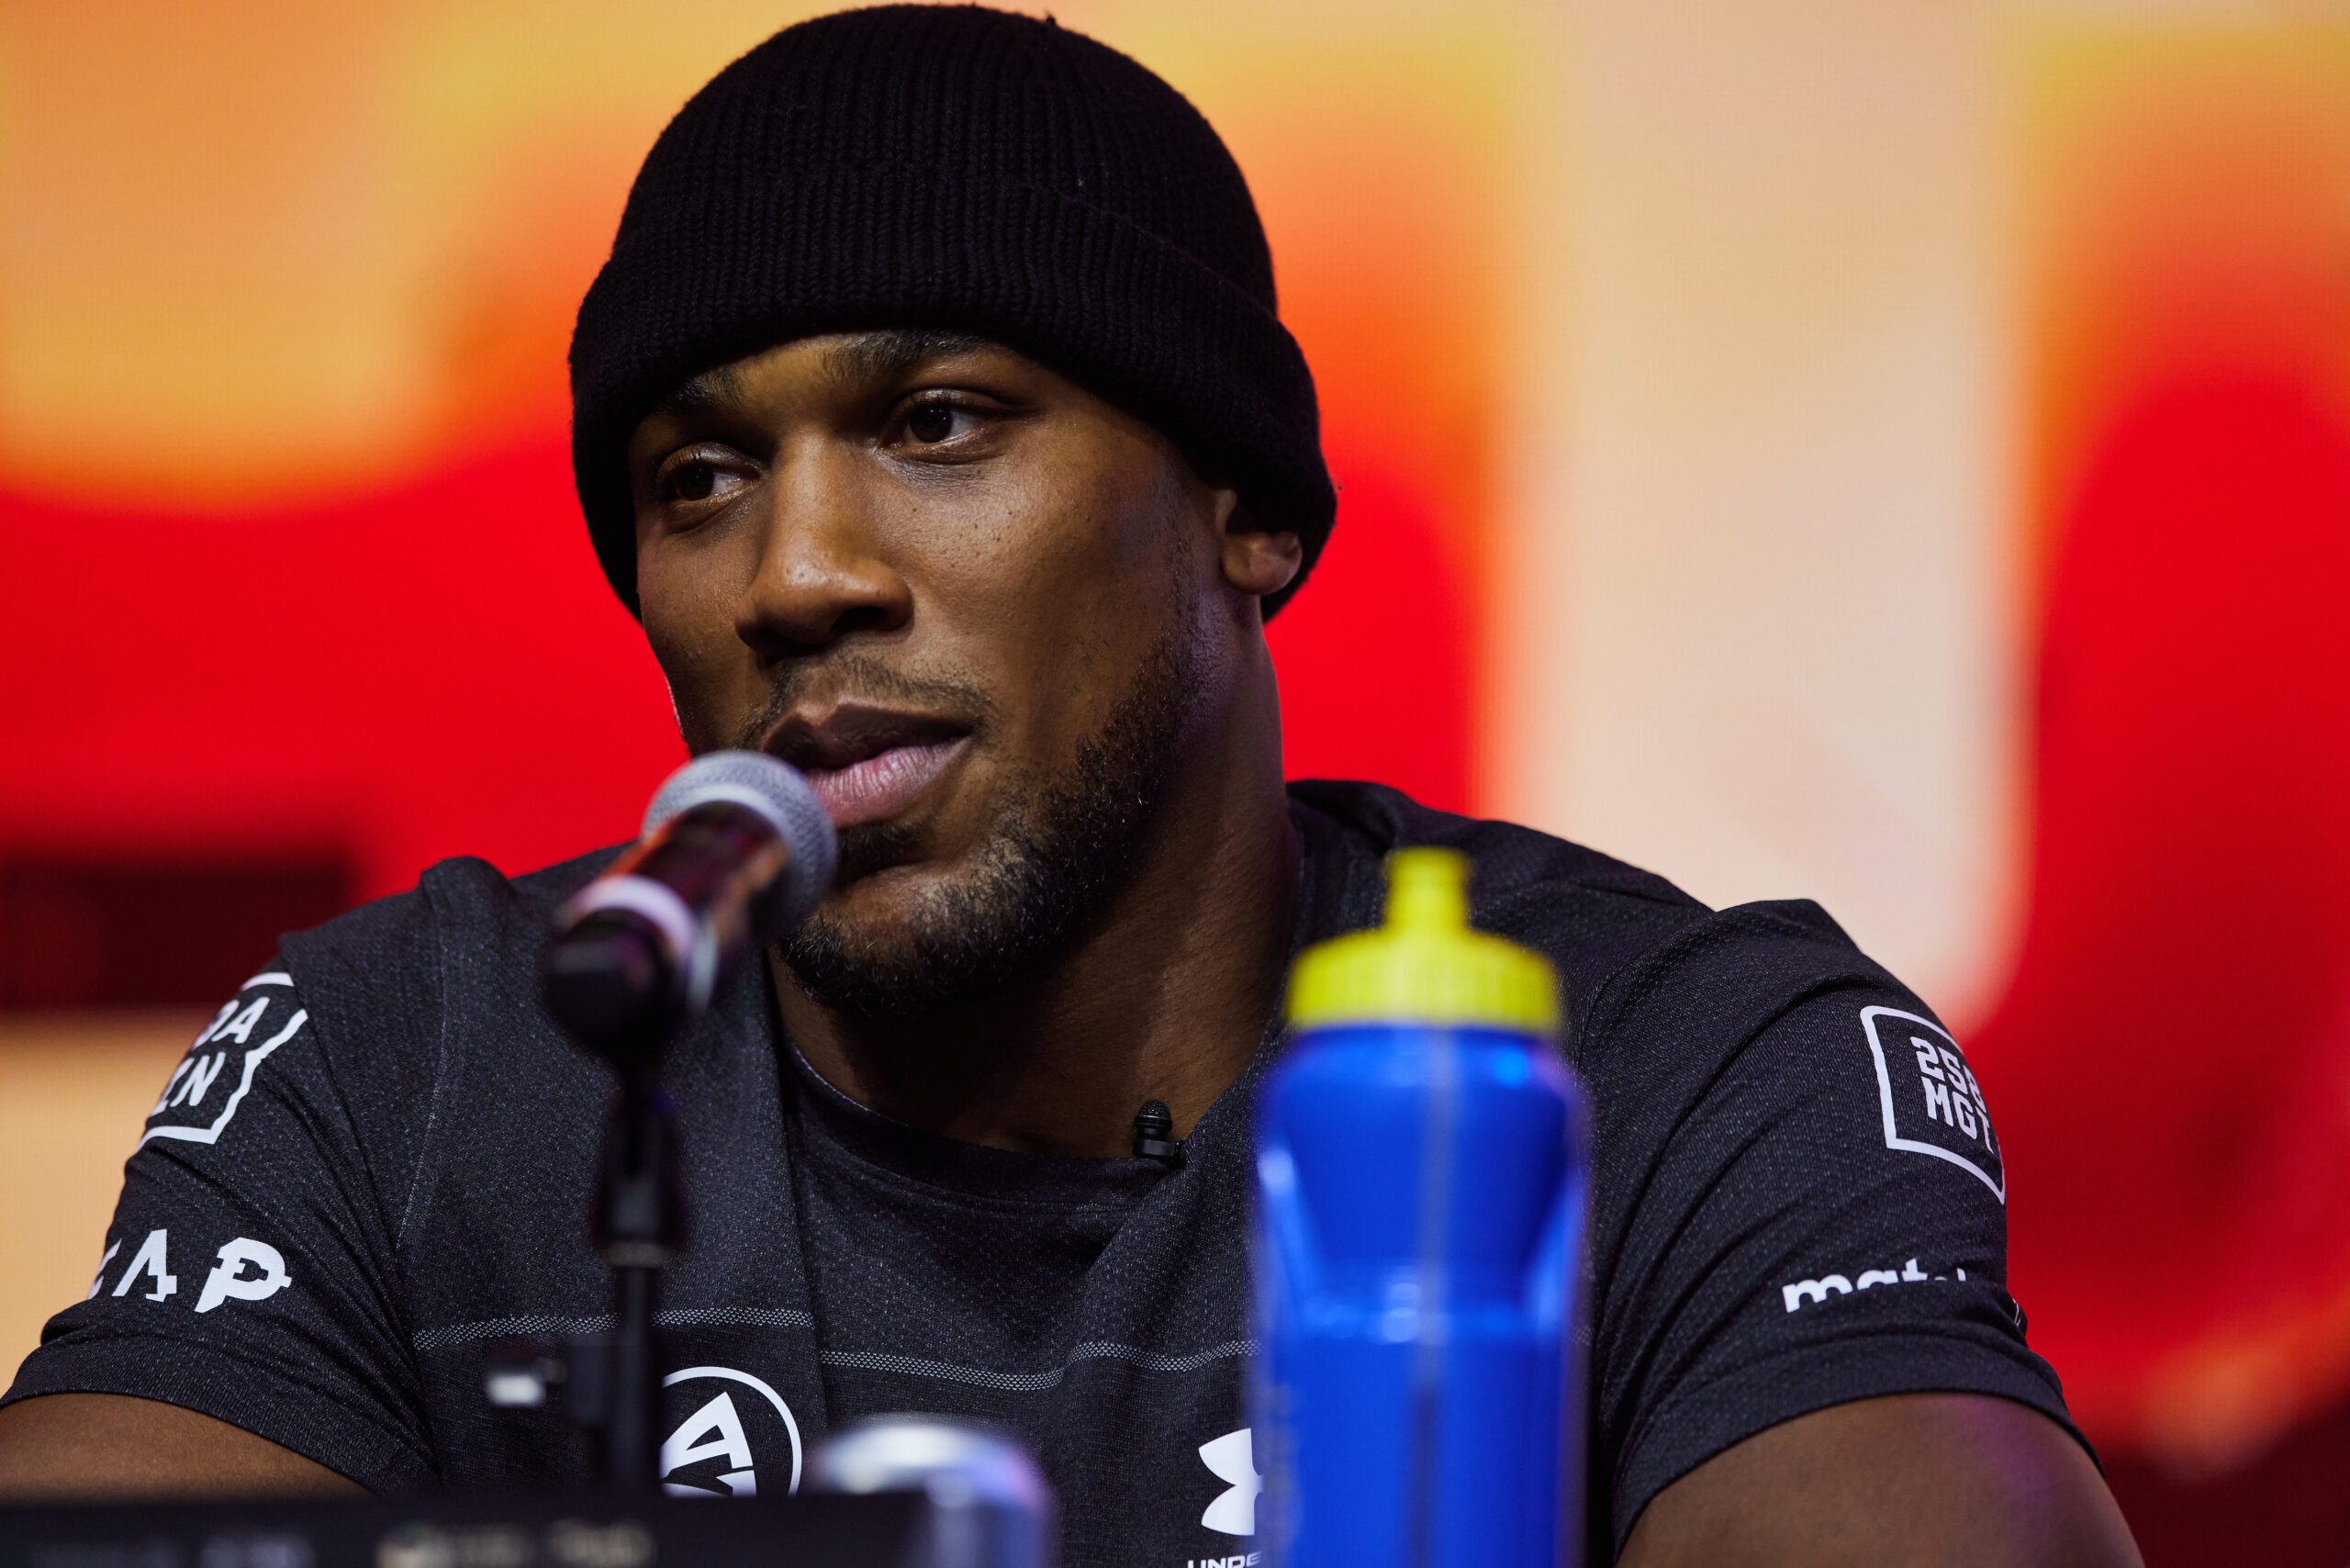 London, London: Anthony Joshua v Francis Ngannou Press Conference to announce upcoming fight in the Kingdom of Saudi Arabia on 8th March 2023.